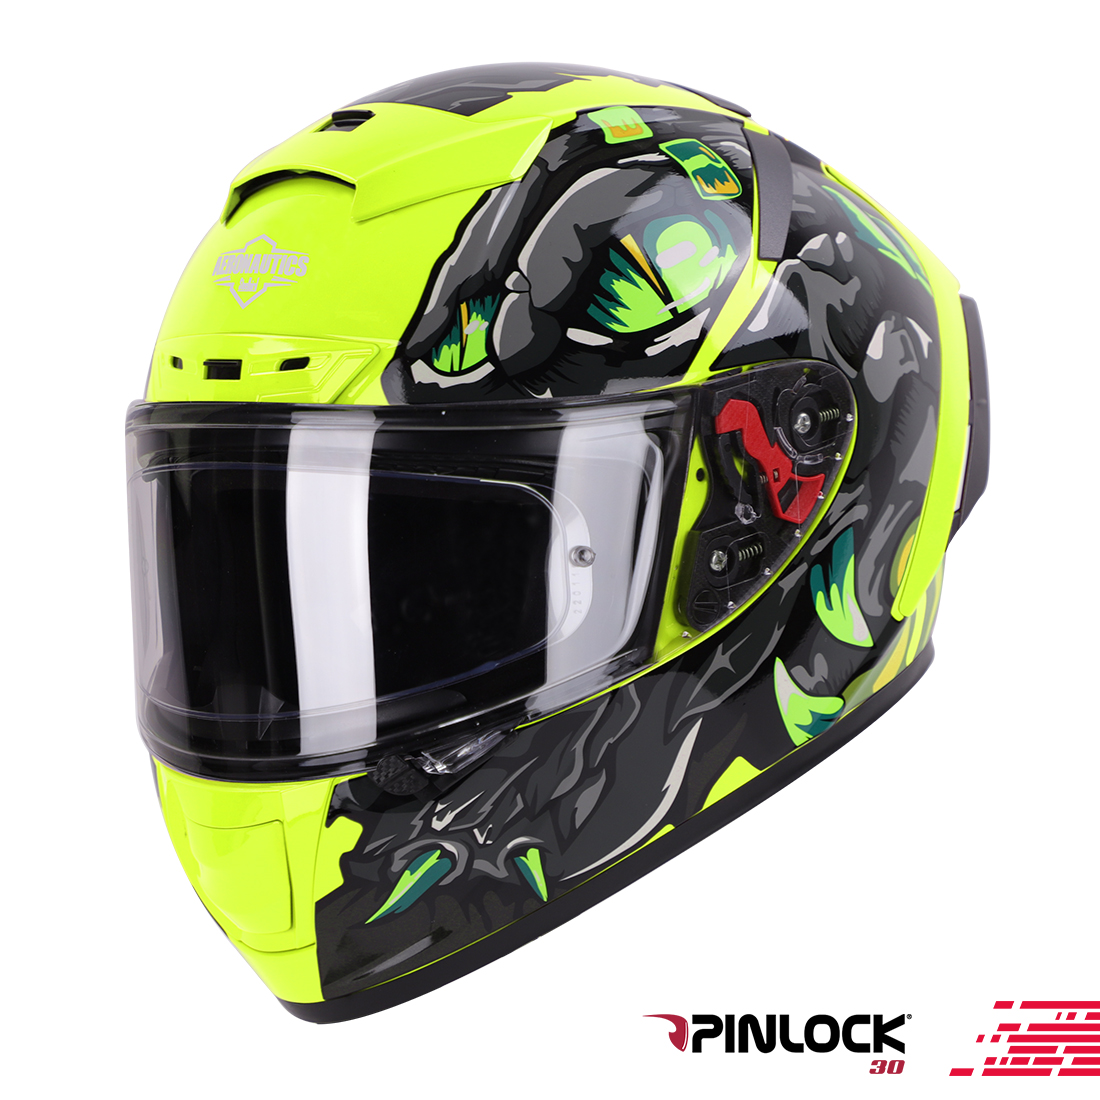 Steelbird SA-5 Monster ISI/DOT Certified Full Face Graphic Helmet With Outer Anti-Fog Clear Visor (Glossy Fluo Neon)